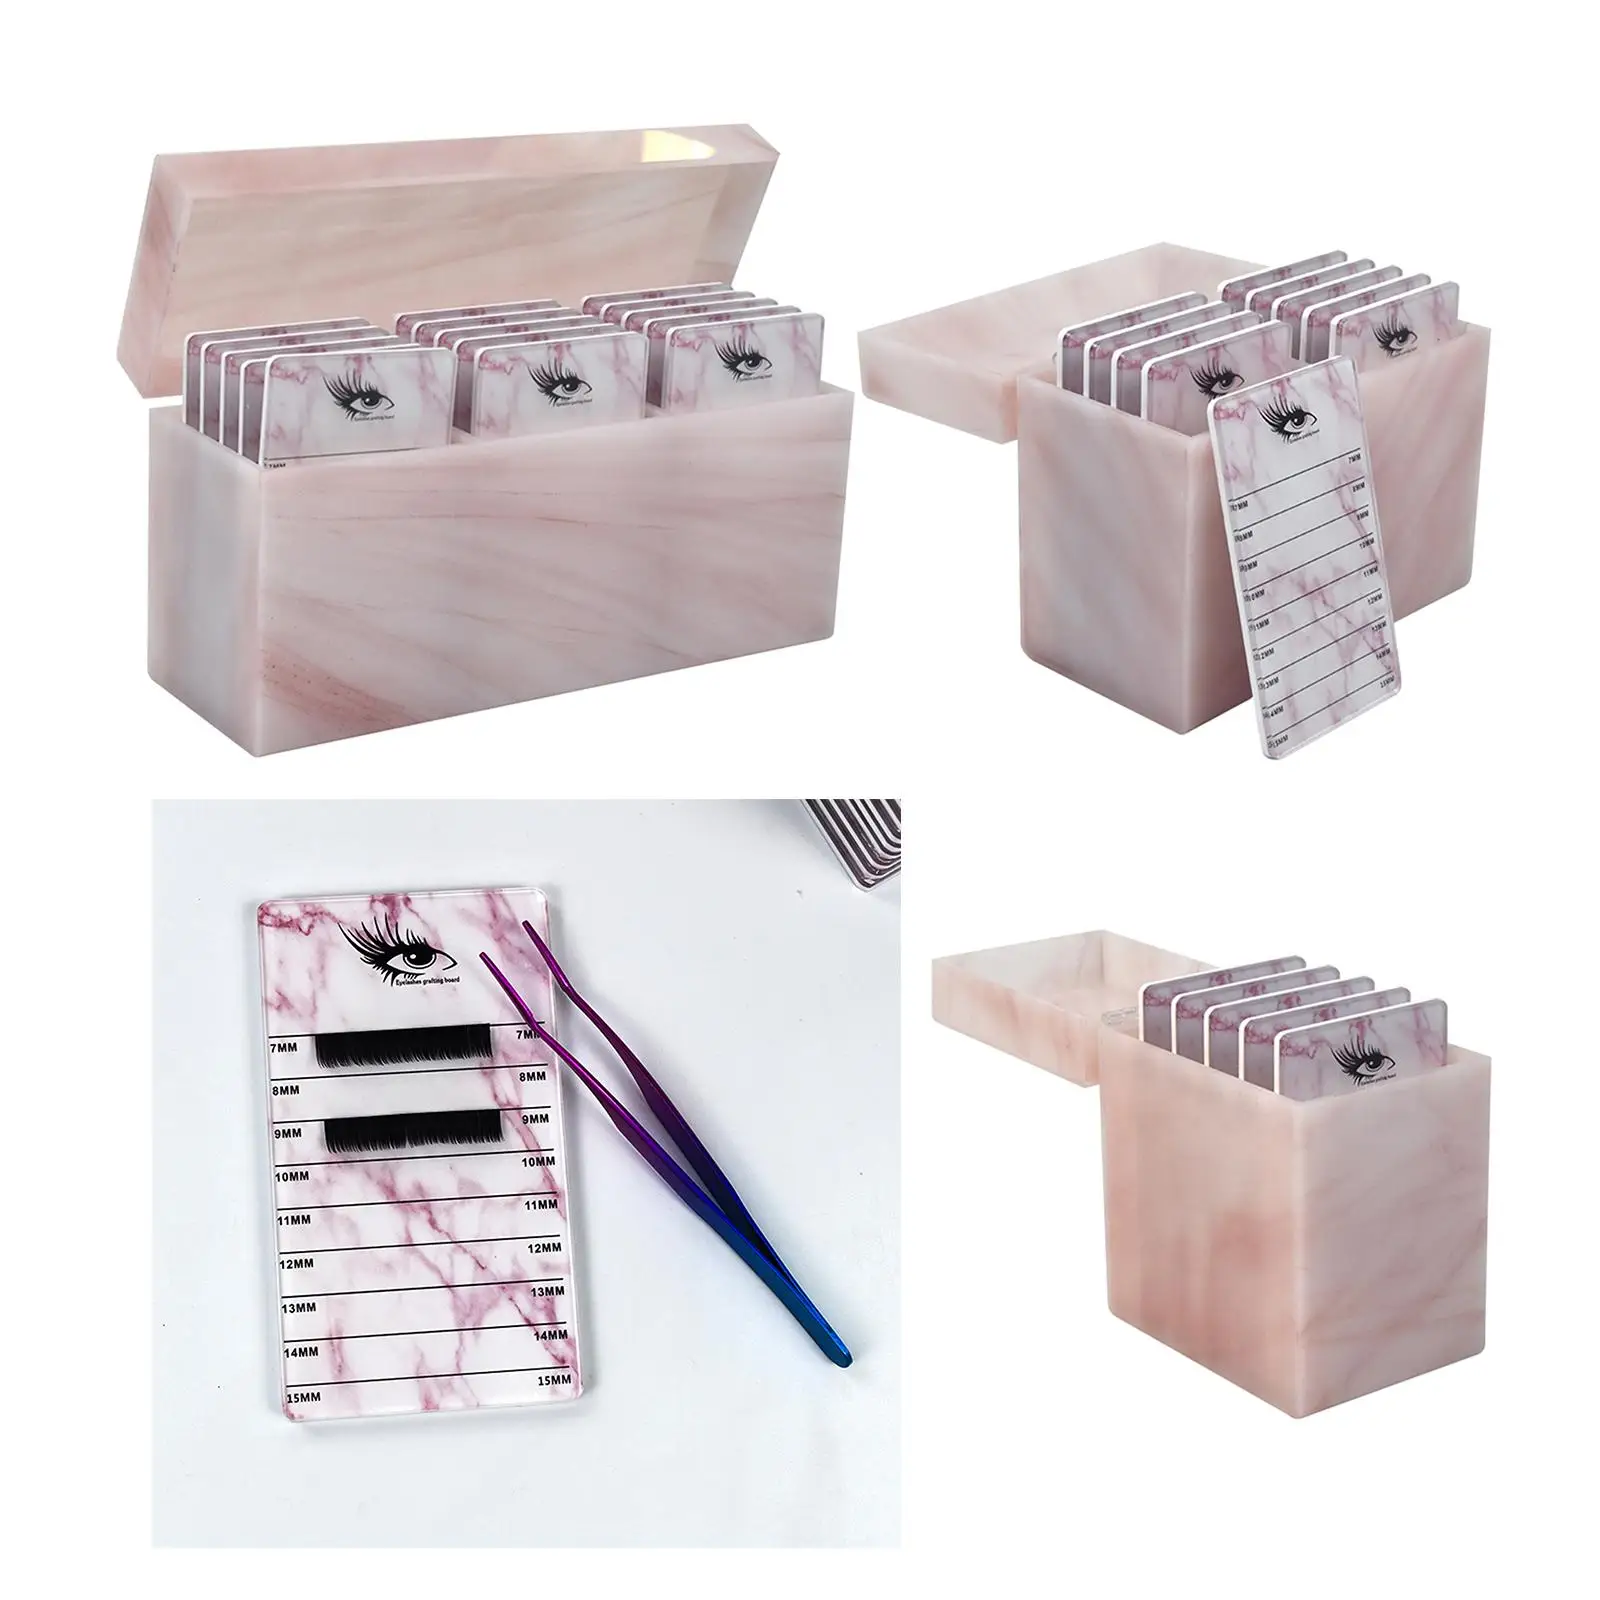 Dustproof Storage Holder Large Capacity Grafting Case Cosmetic Makeup Tool Multiple Layers Durable Portable Organizer Stand